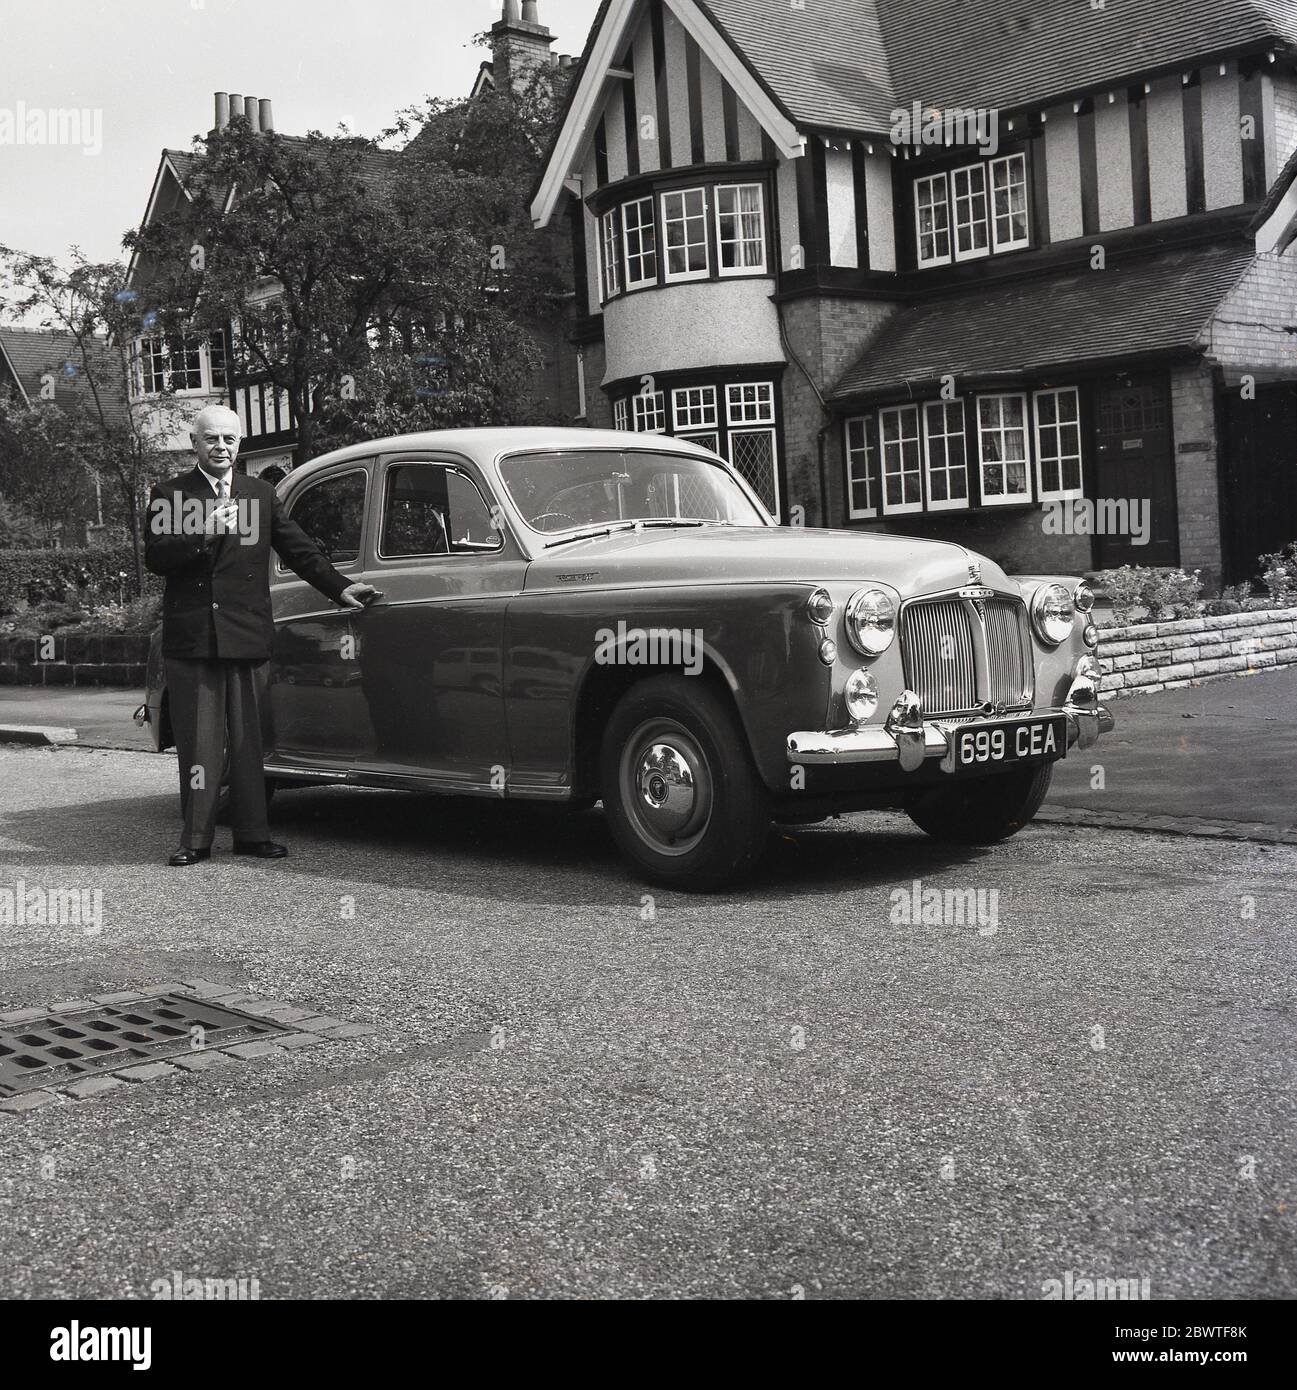 1961, historical, an elderly English gentleman in a balzer and slacks and holding a pipe, standing proudly by his two-tone Rover 100 motorcar outside a large house in the suburbs, England, UK. Designed by Gordon Bashford and from of the Rover P4 family of cars - known as 'Auntie Rovers', -these elegant motorcars were driven by Royalty- Grace Kelly owned one - and are an important part of British culture. The Rover 100 was introduced in October 1959 and was a 4-door saloon with a luxurious with a leather and wood interior. Stock Photo